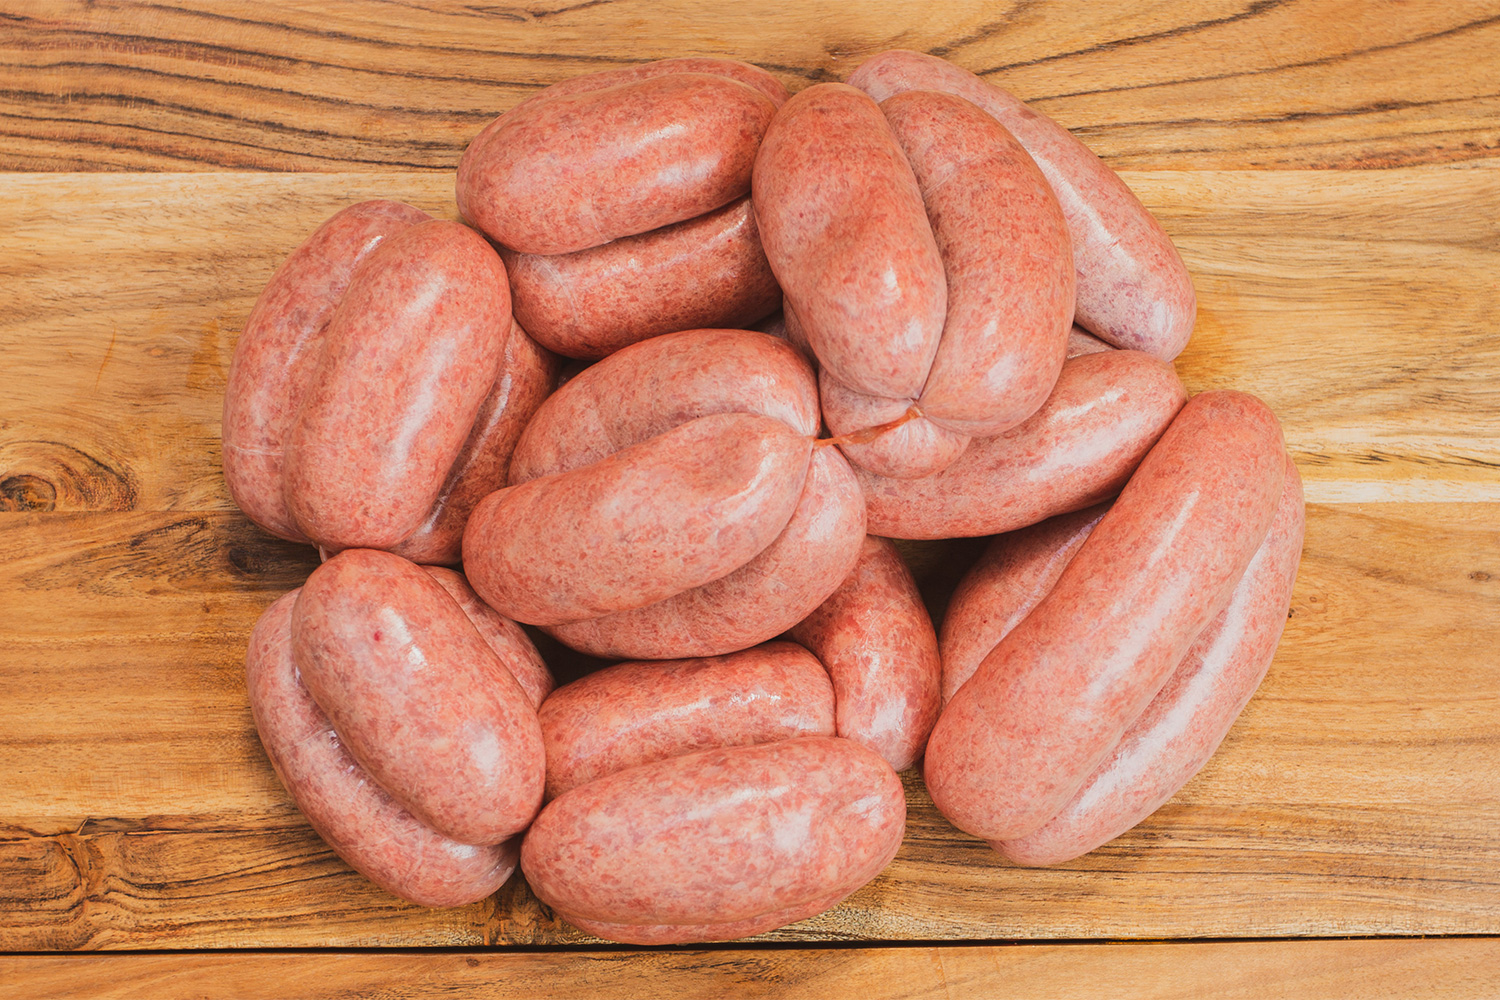 Handcrafted sausages for dogs - 100% chicken treats supporting pet's health and happiness by Roar Pet Food.